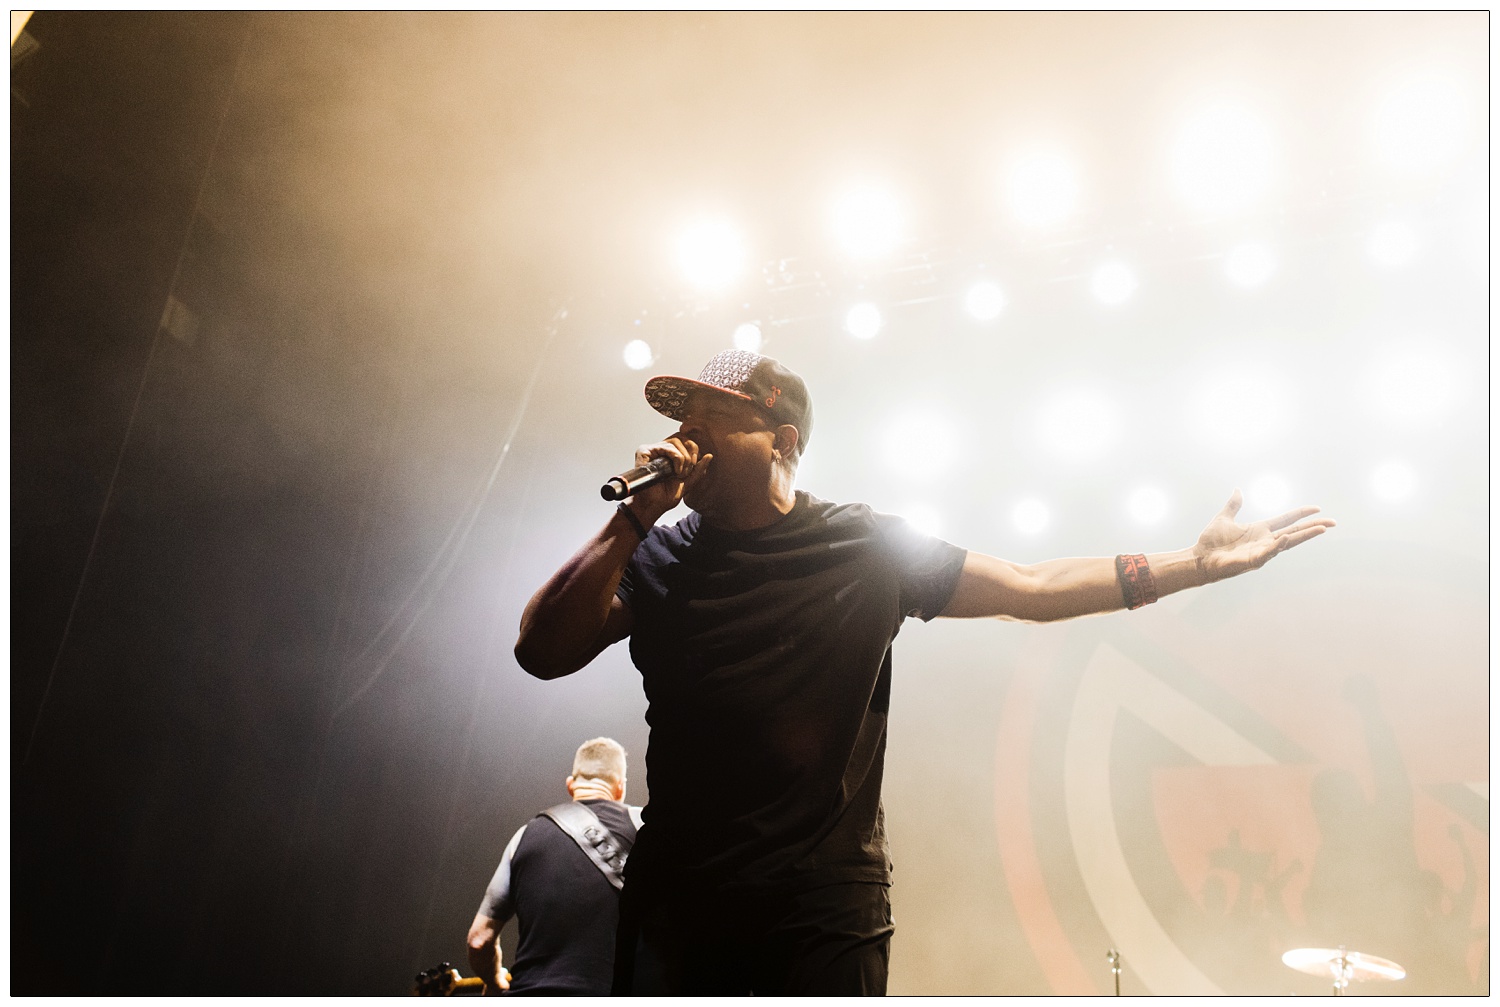 Chuck D with Prophets of Rage.